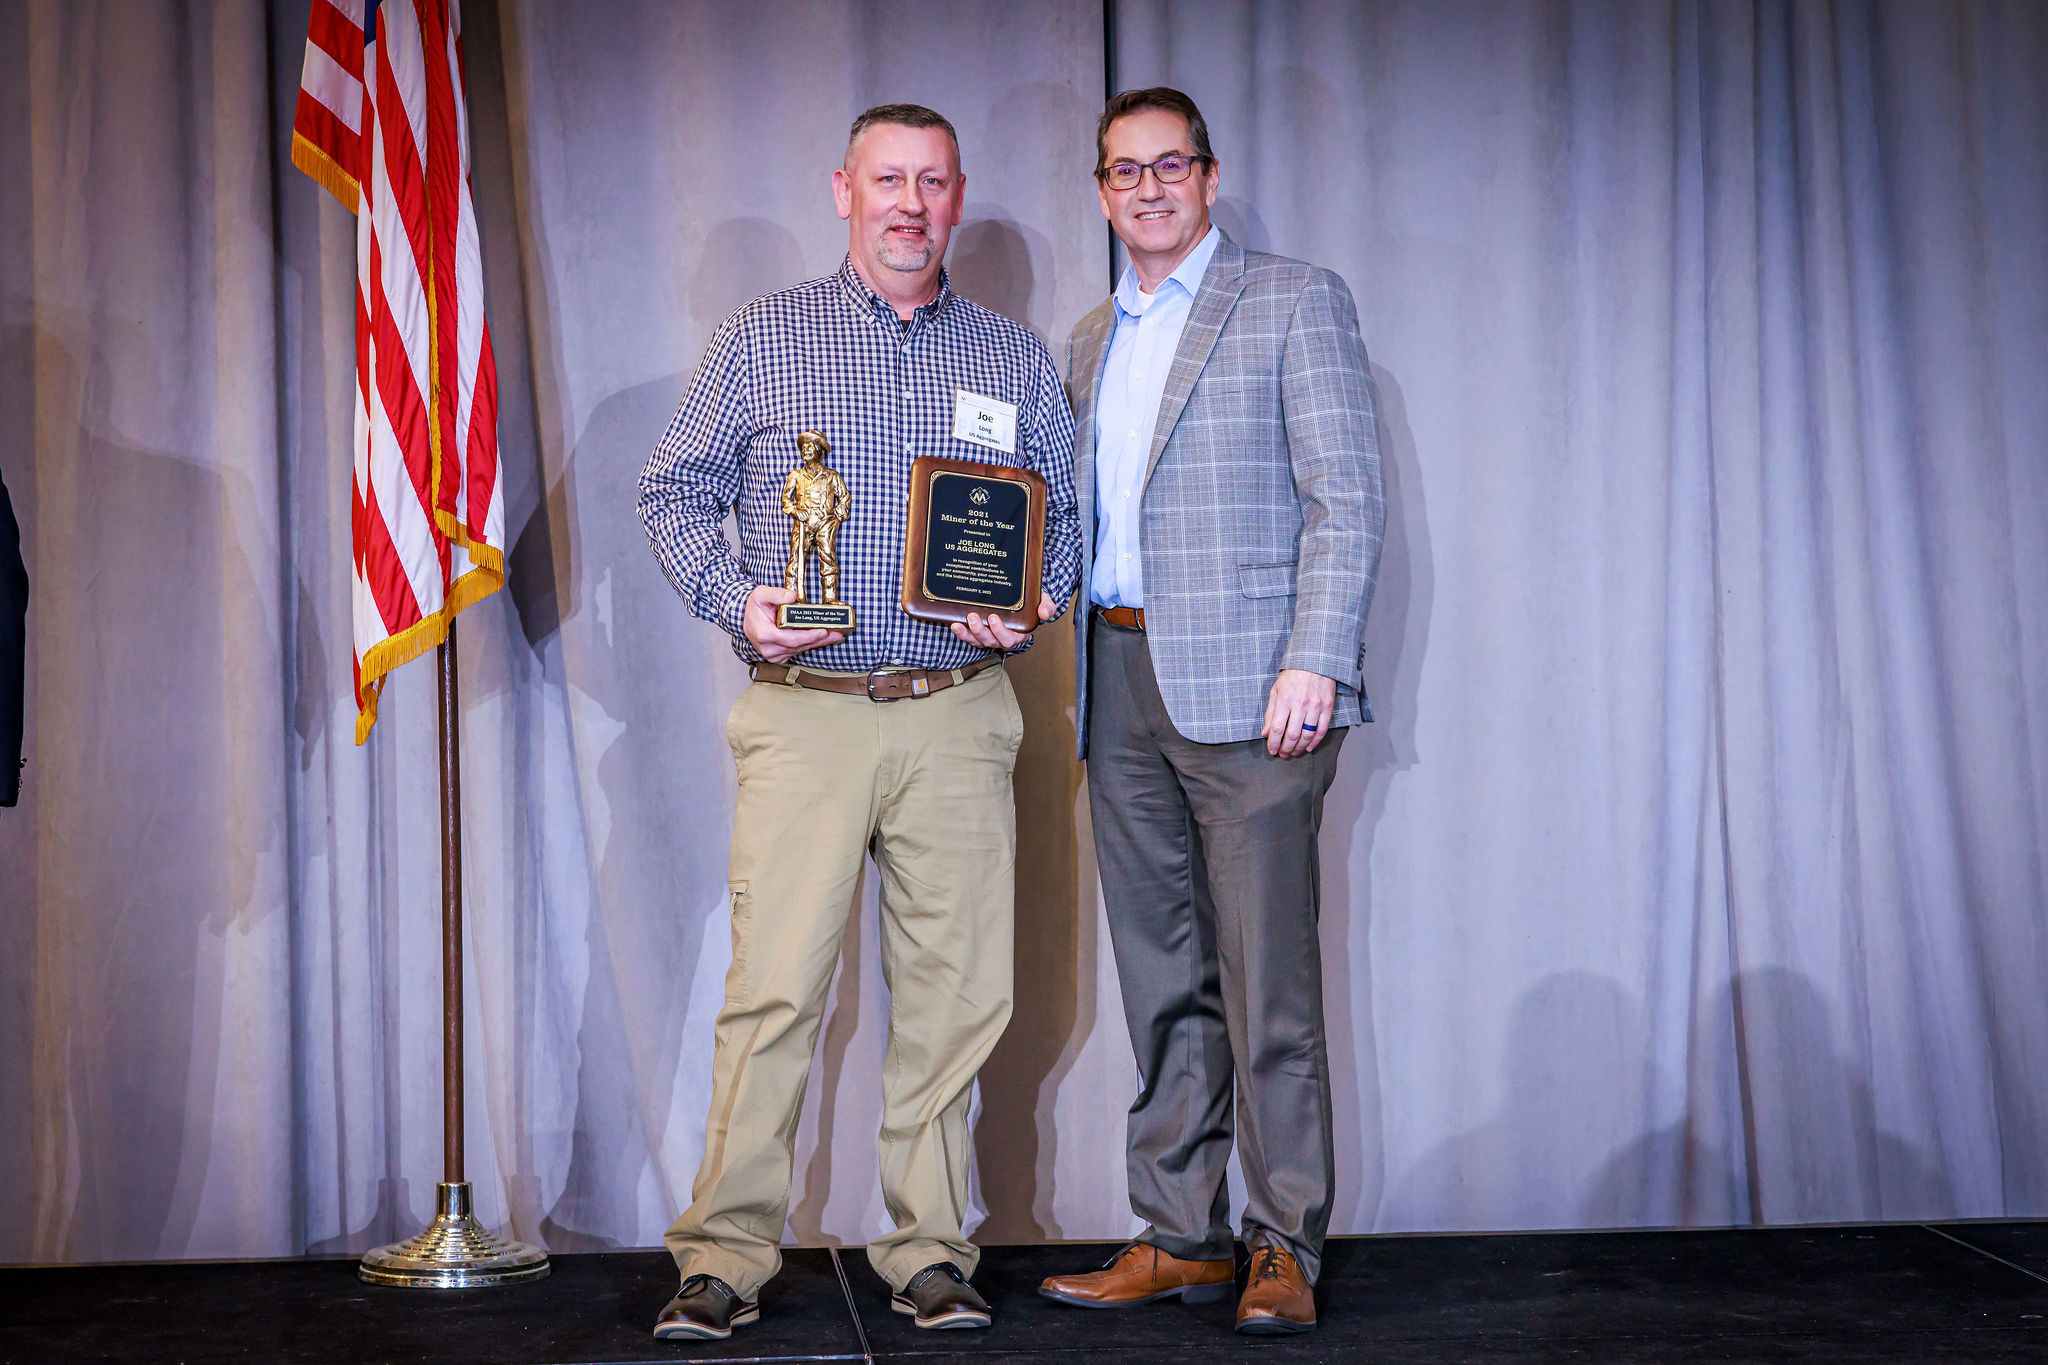 Joe Long (left) receives the IMAA Miner of the Year Award from John Schmidt (right).